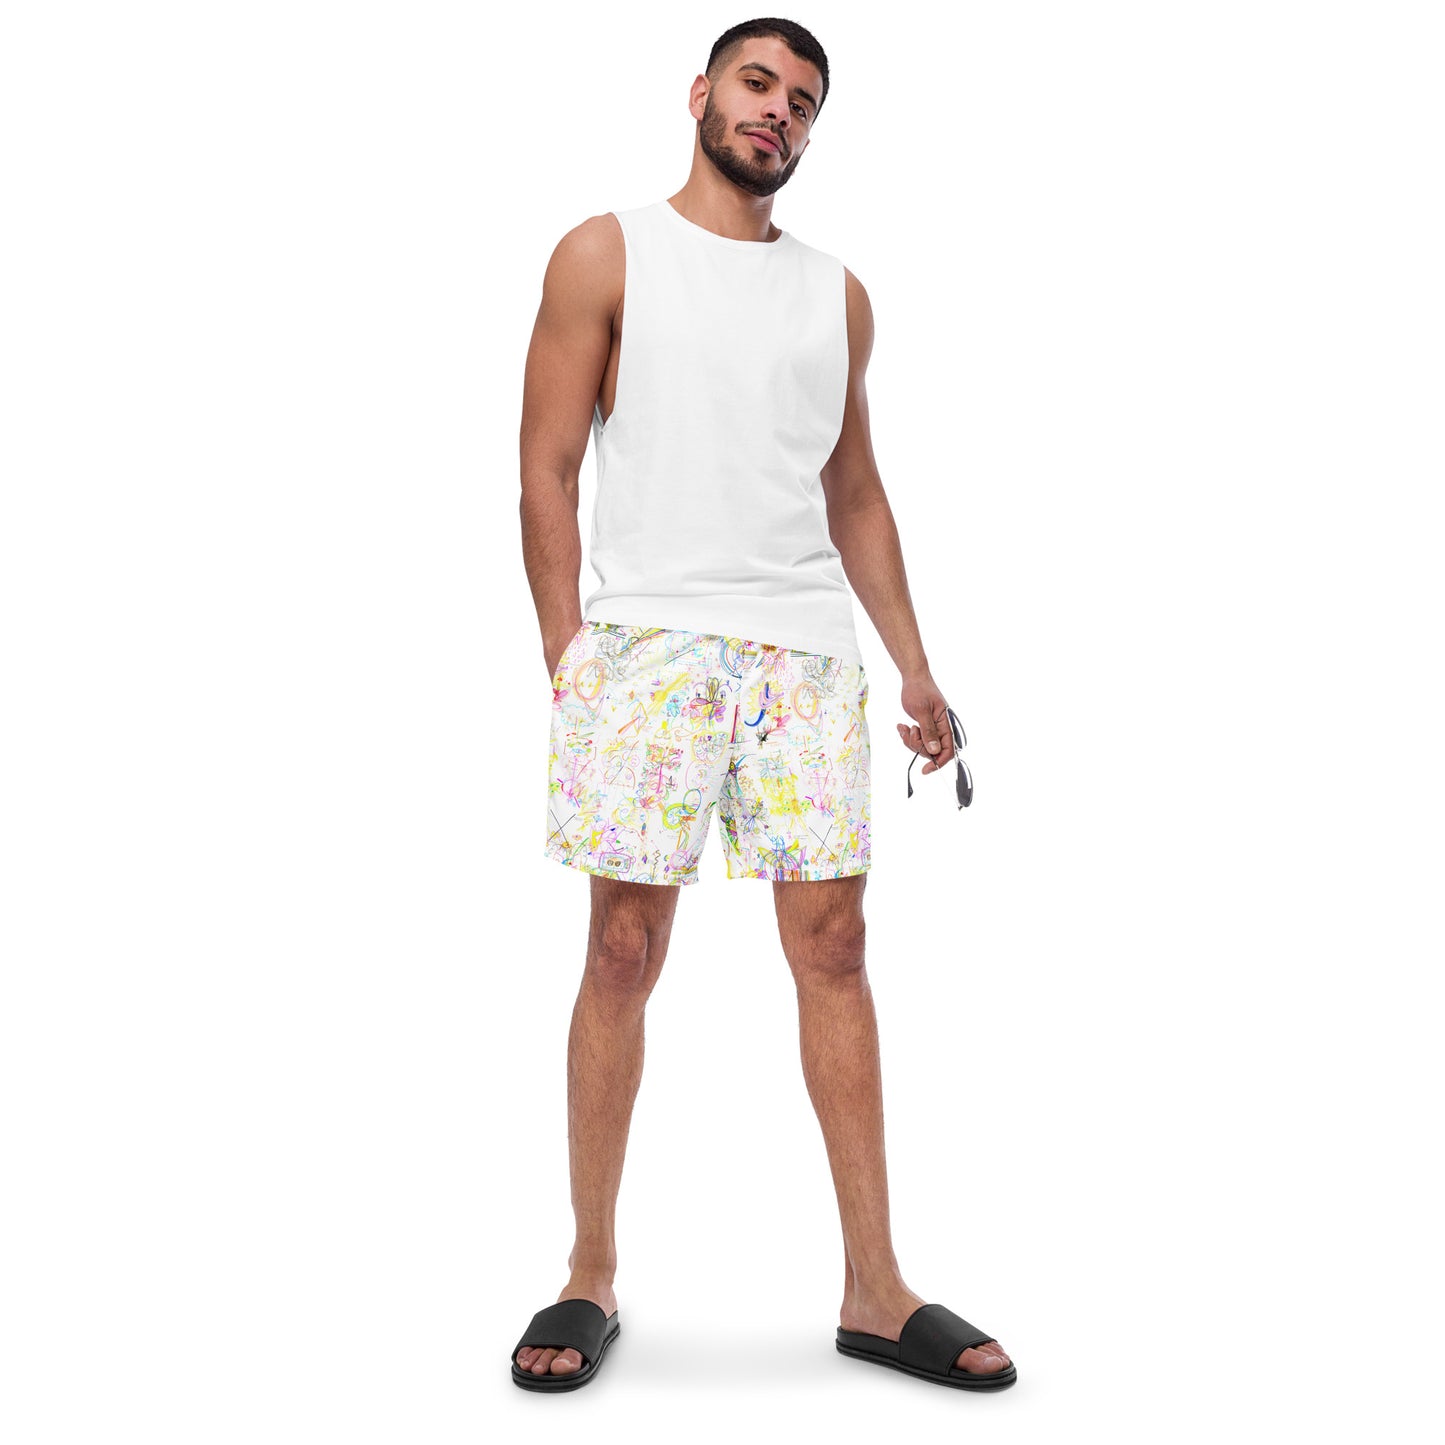 the GODDESS is calling, masculine recycled swim trunks in white